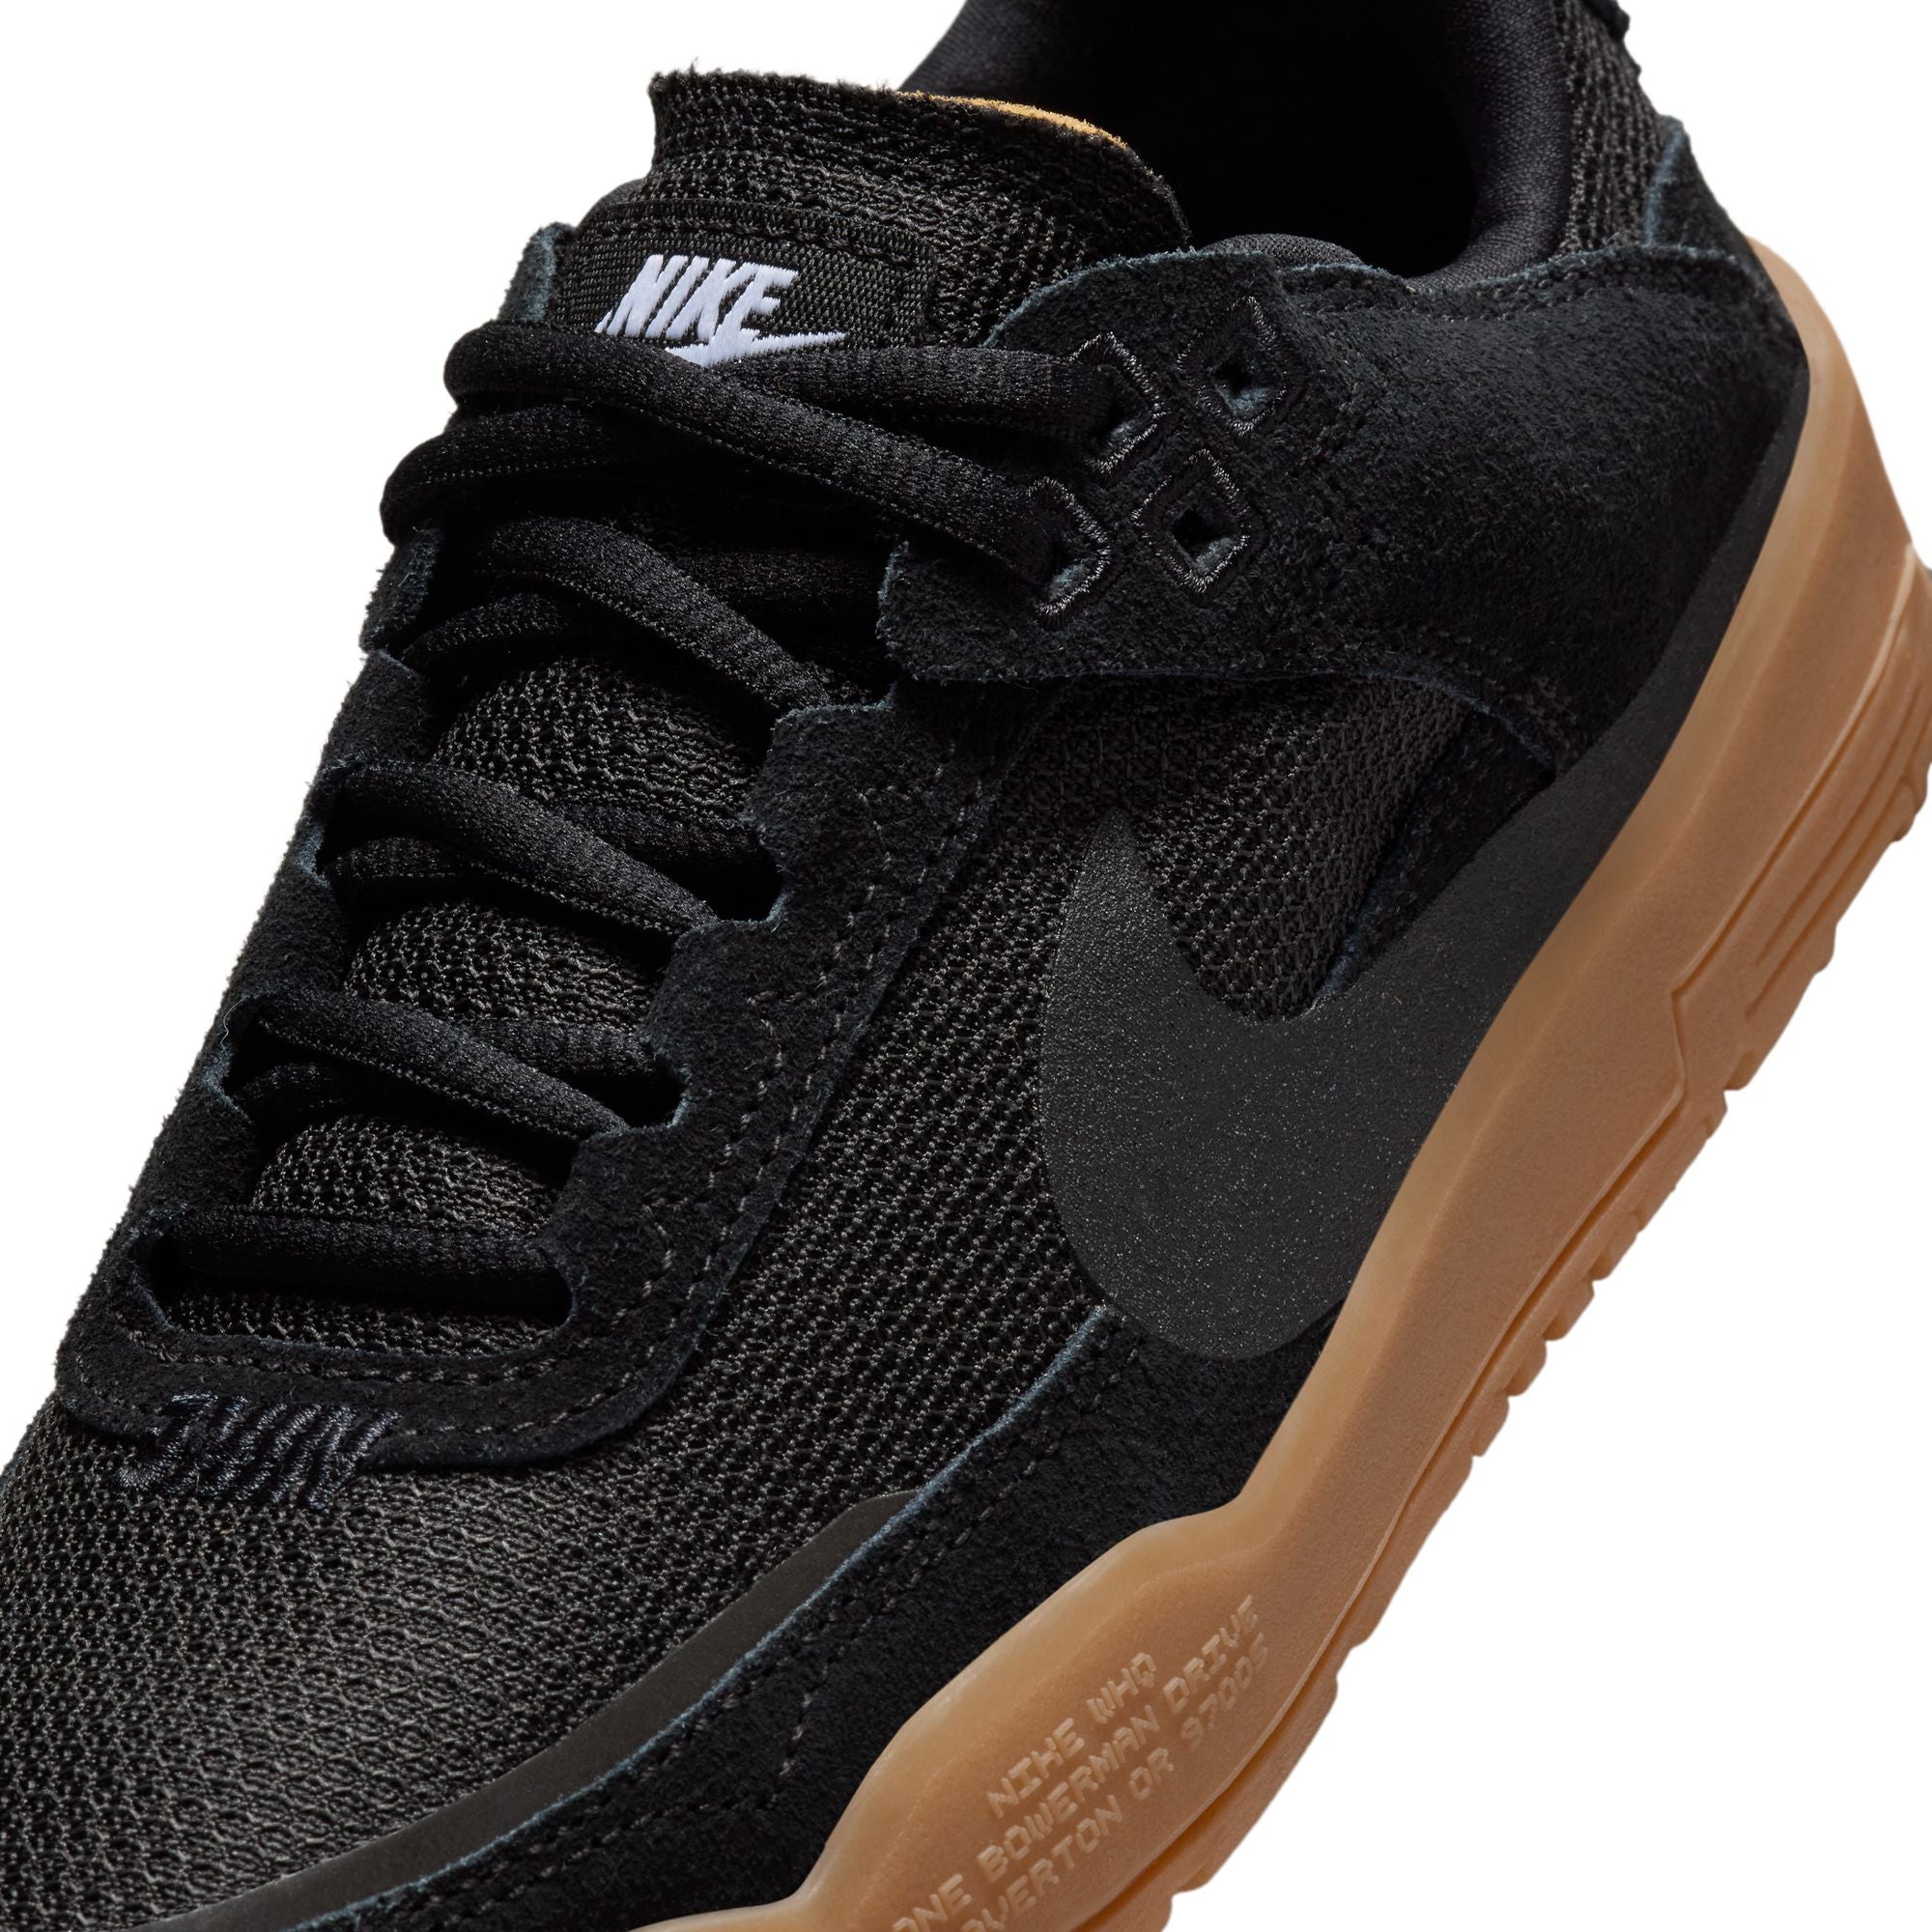 Black nike sb low top kids trainers with black nike swoosh and gum sole. Free uk shipping over £50